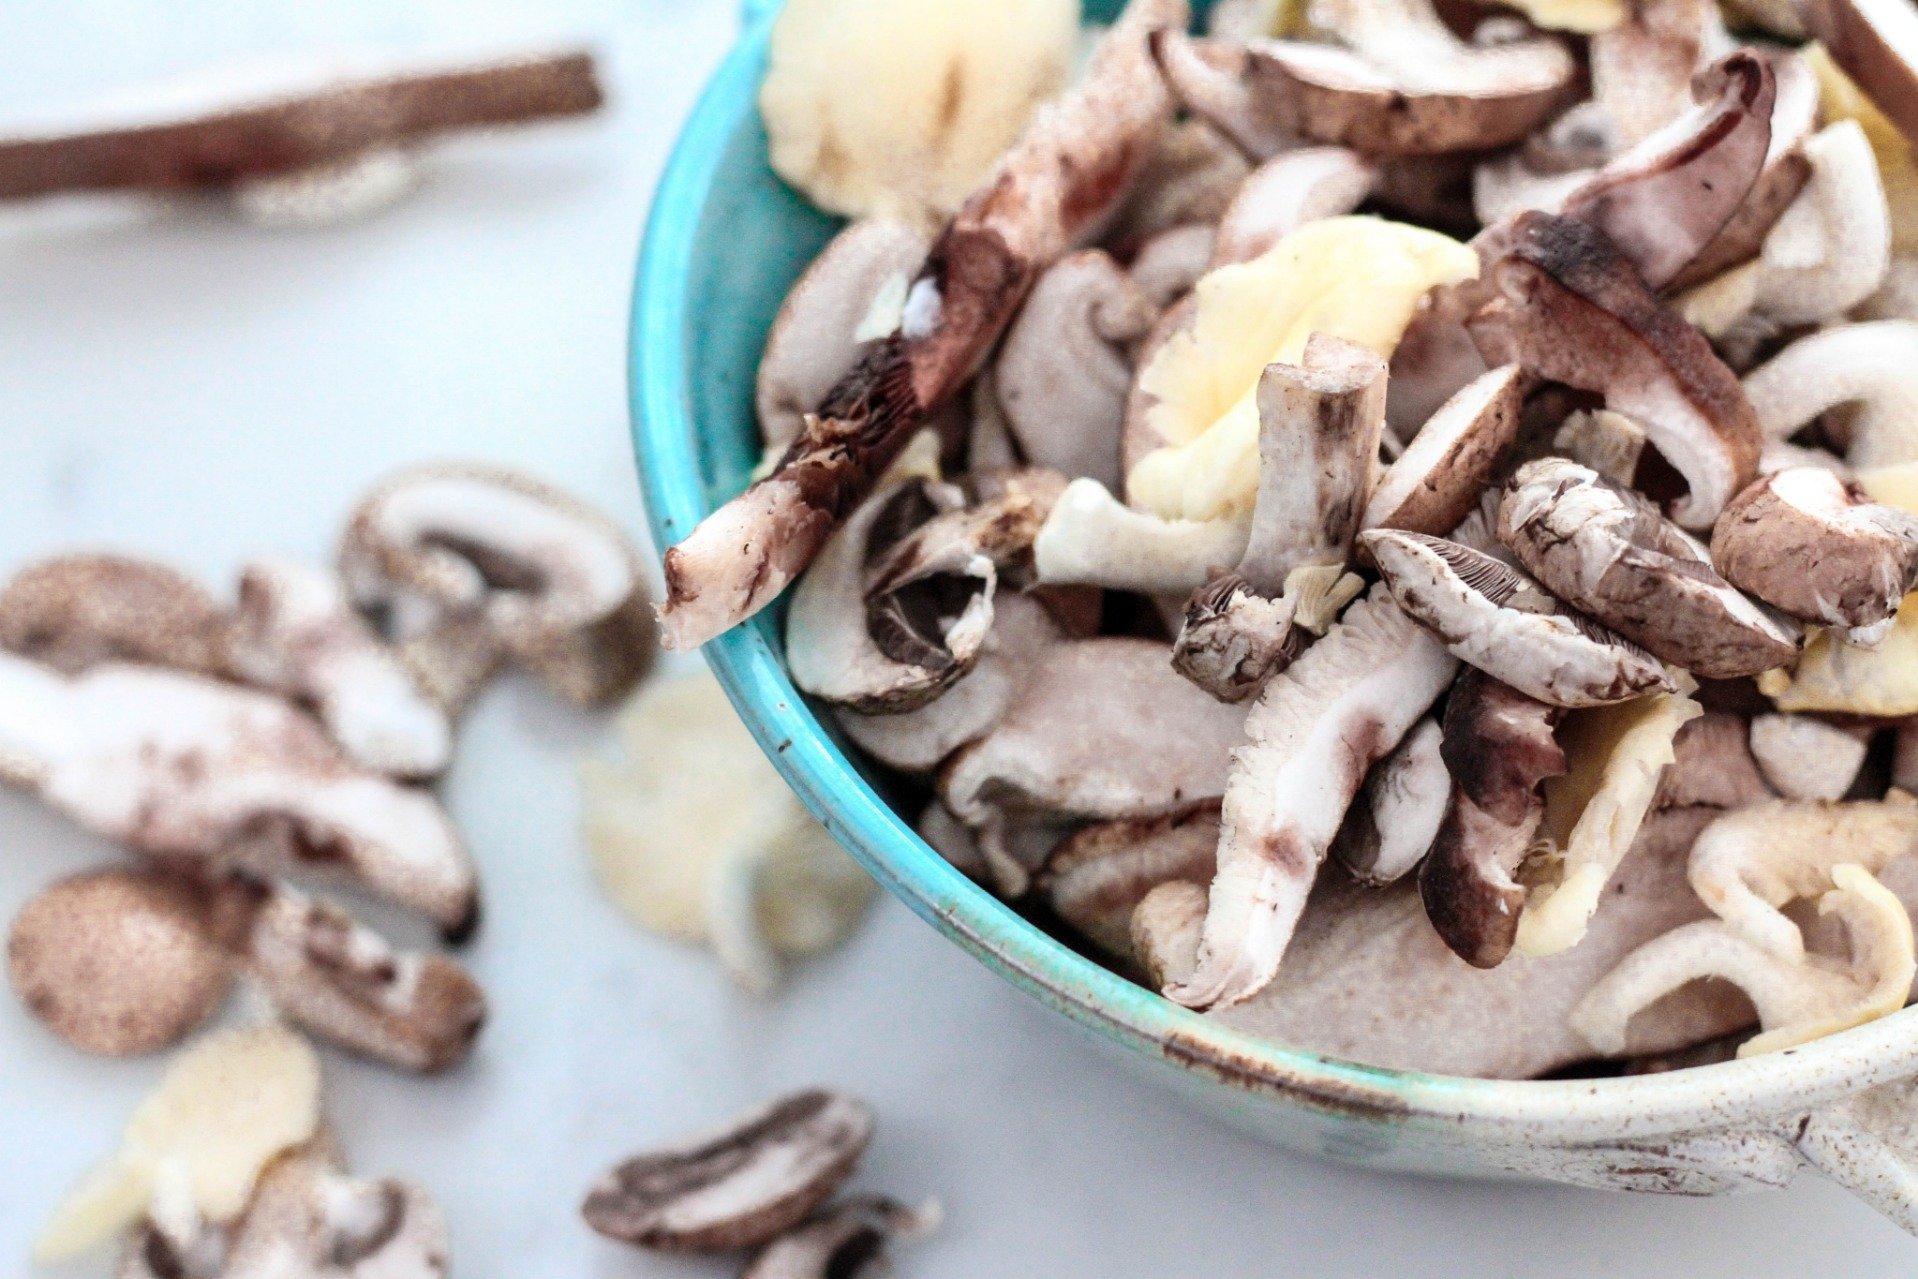 Overflowing bowl of sliced Mushrooms ready to be cooked is a Superfood that it is.